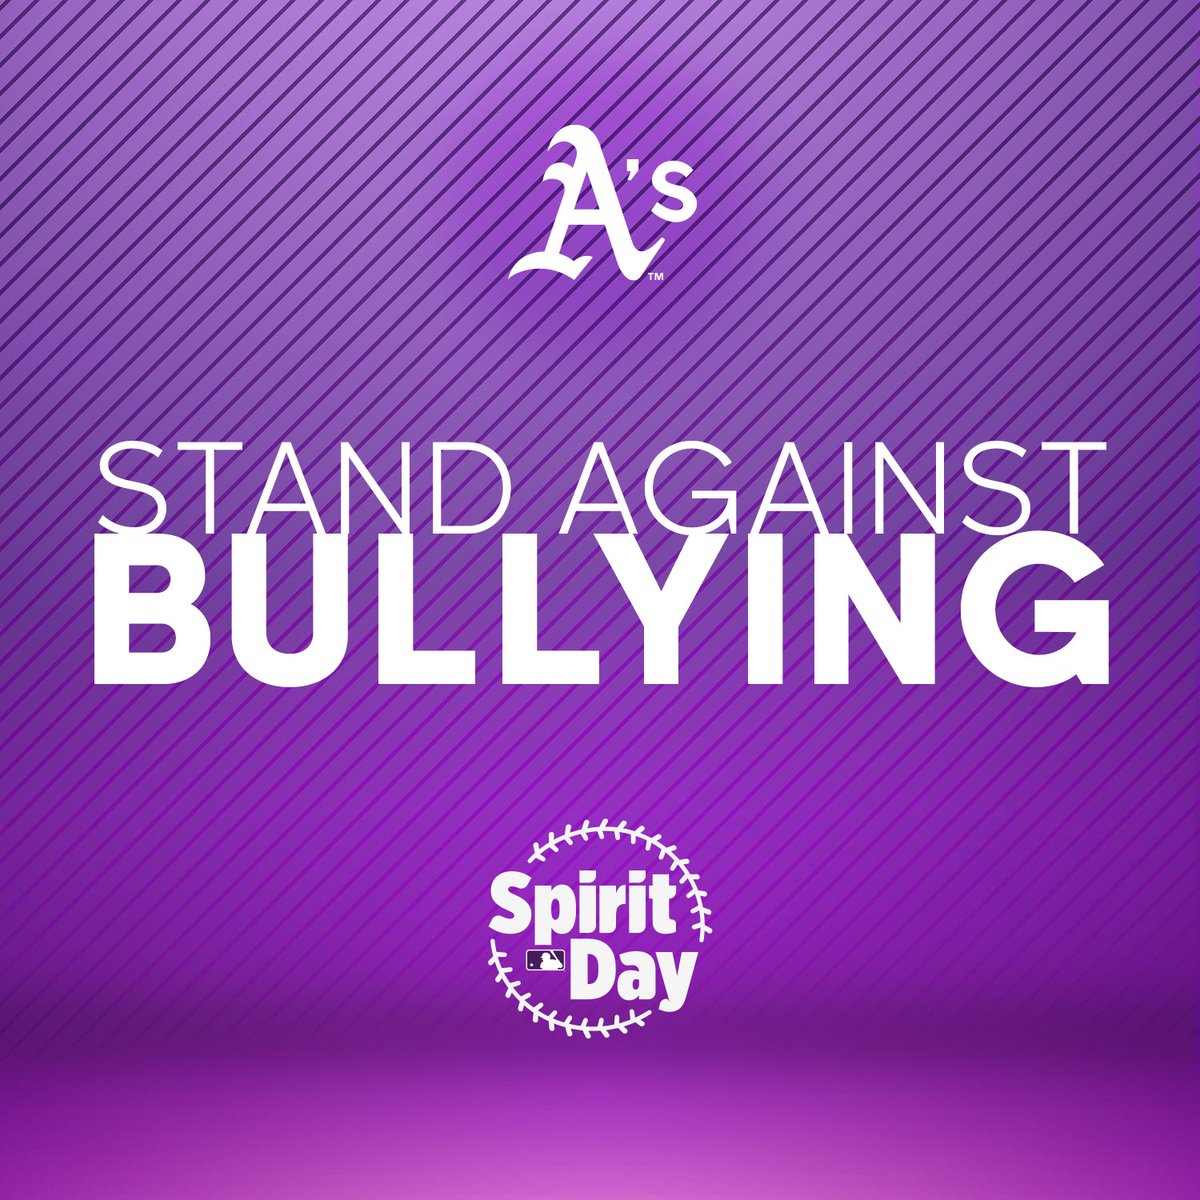 On #SpiritDay and everyday, we are proud to support the LGBTQ+ community. Join us by going purple and taking a stand against bullying of LGBTQ+ youth and supporting inclusion! 💜 Learn more and get involved: glaad.org/spiritday